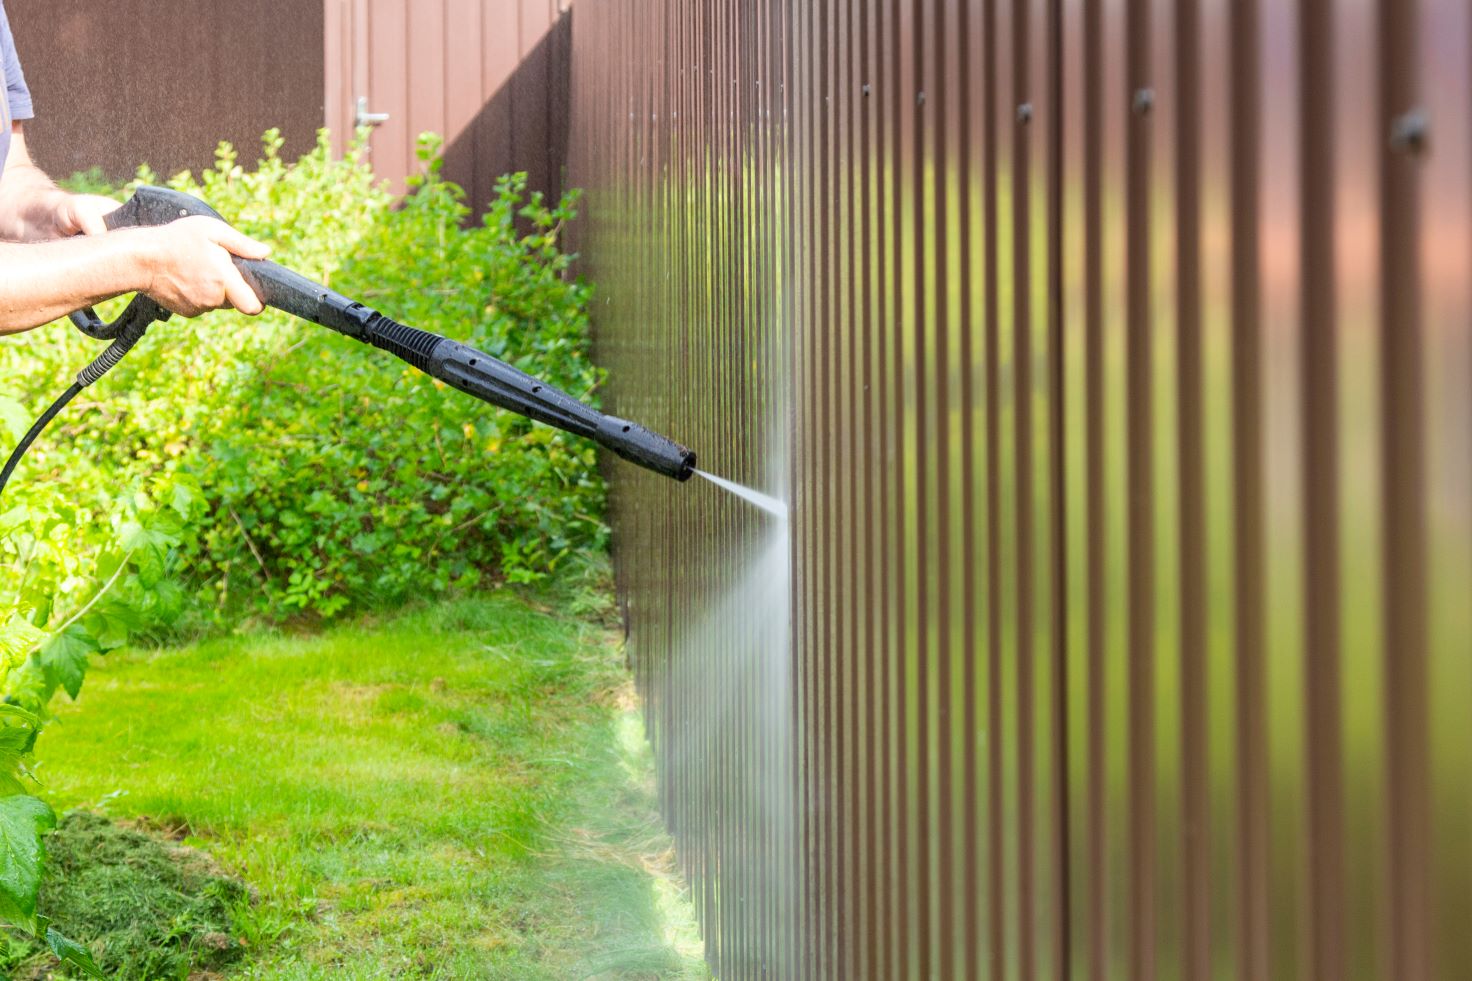 A powerwasher sprays a wooden fence to clean it.